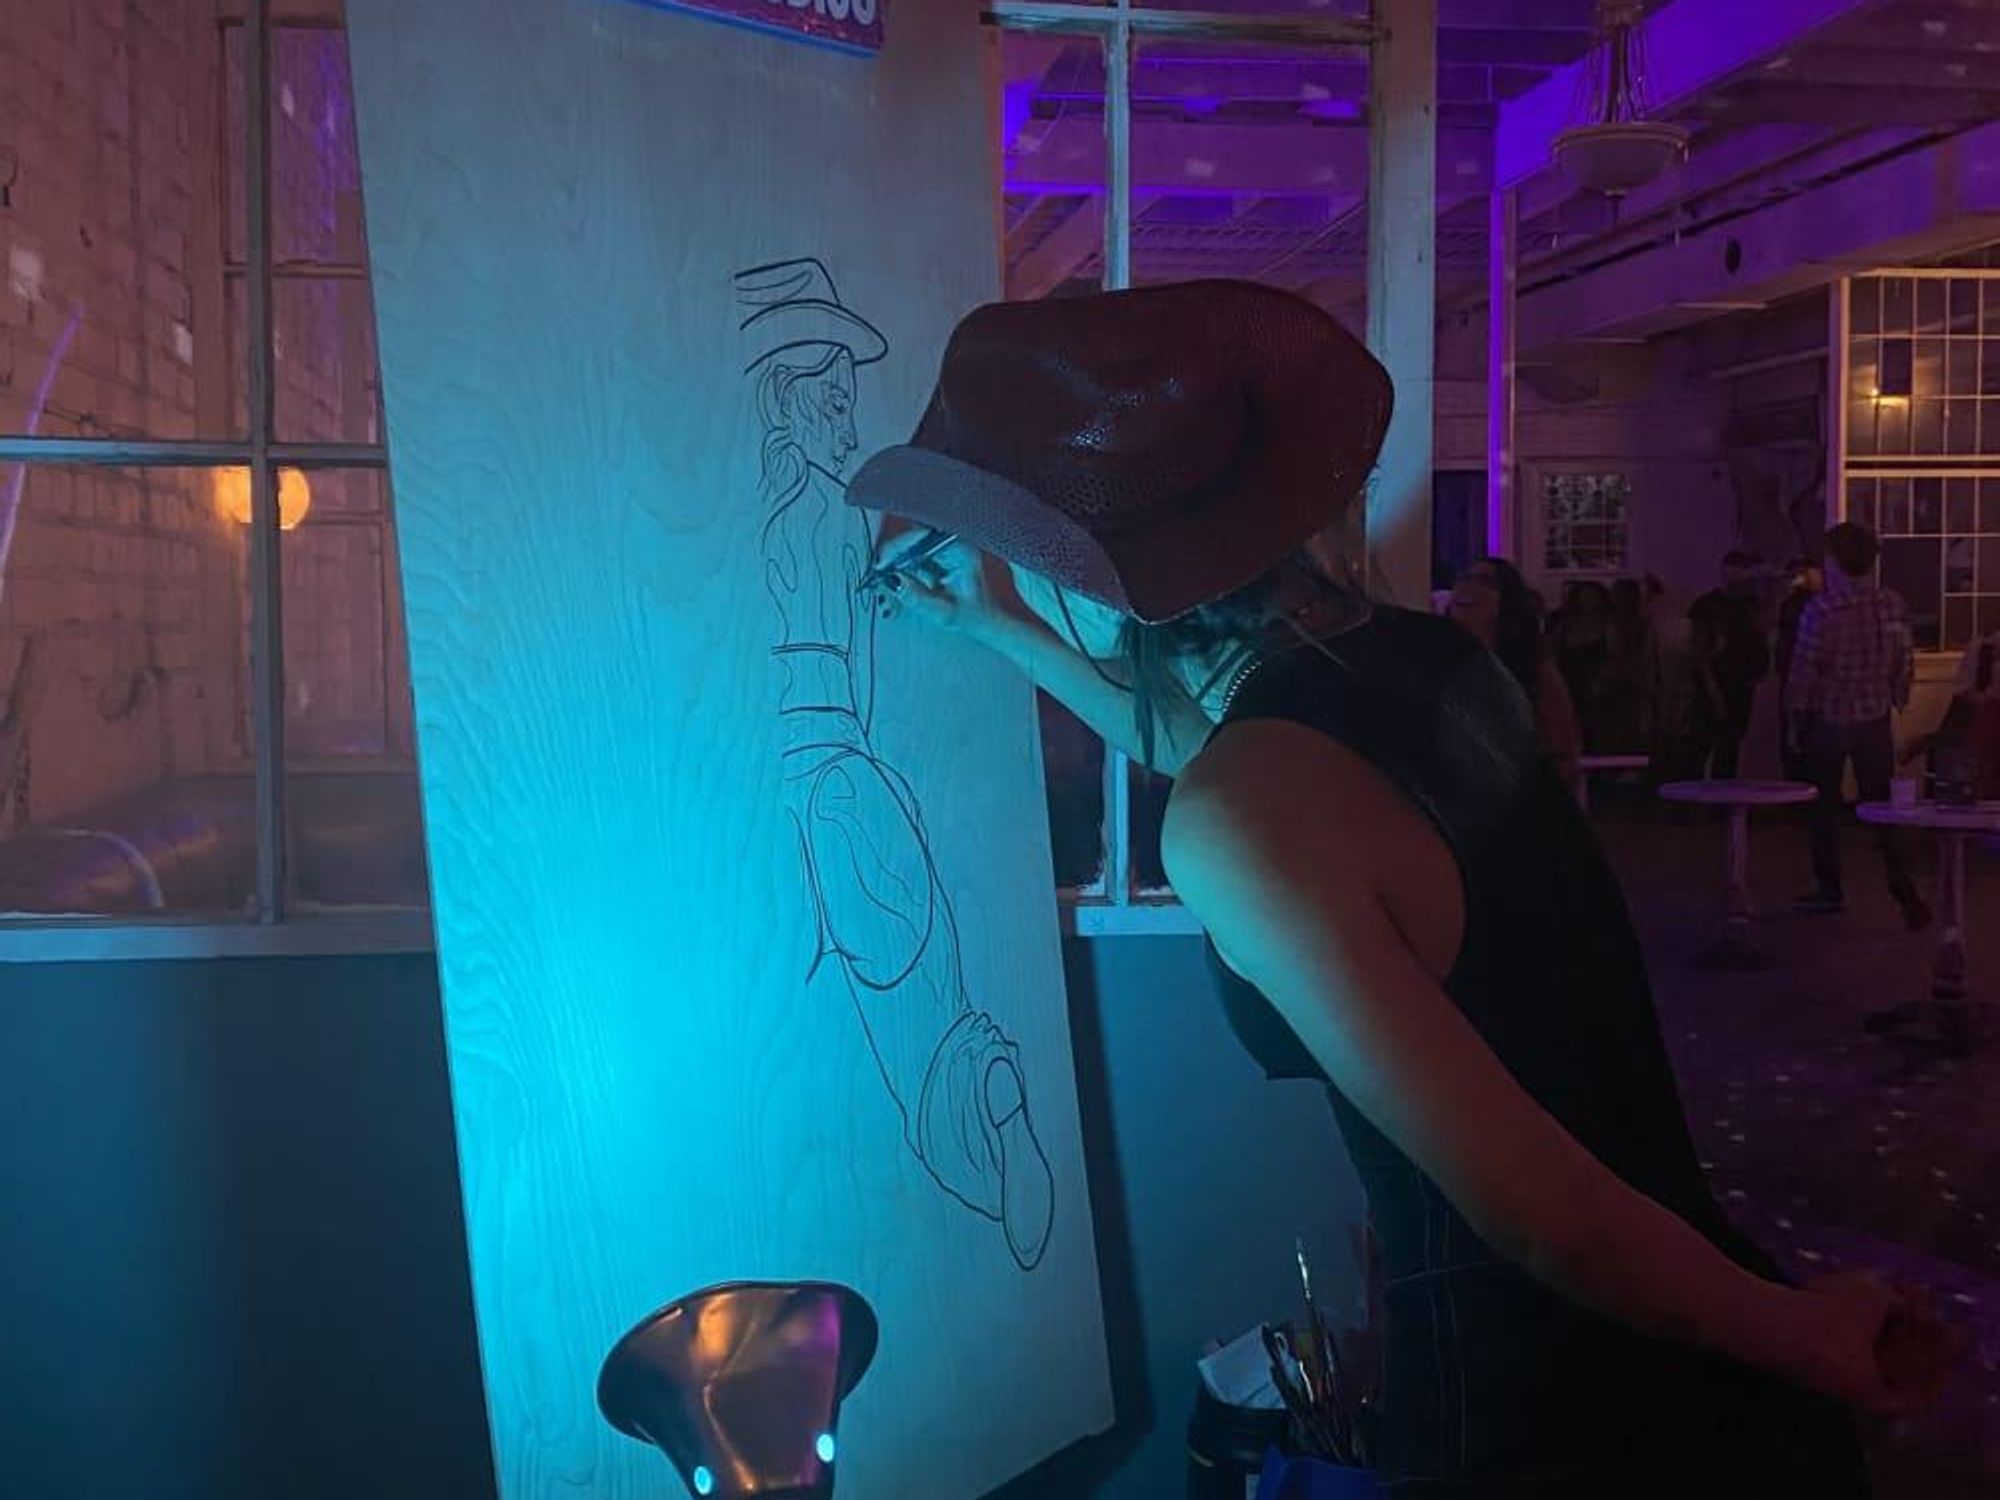 AJ Brooker works on a line drawing of a nude cowgirl at the Swan Dive during the "Saddle Up" event.